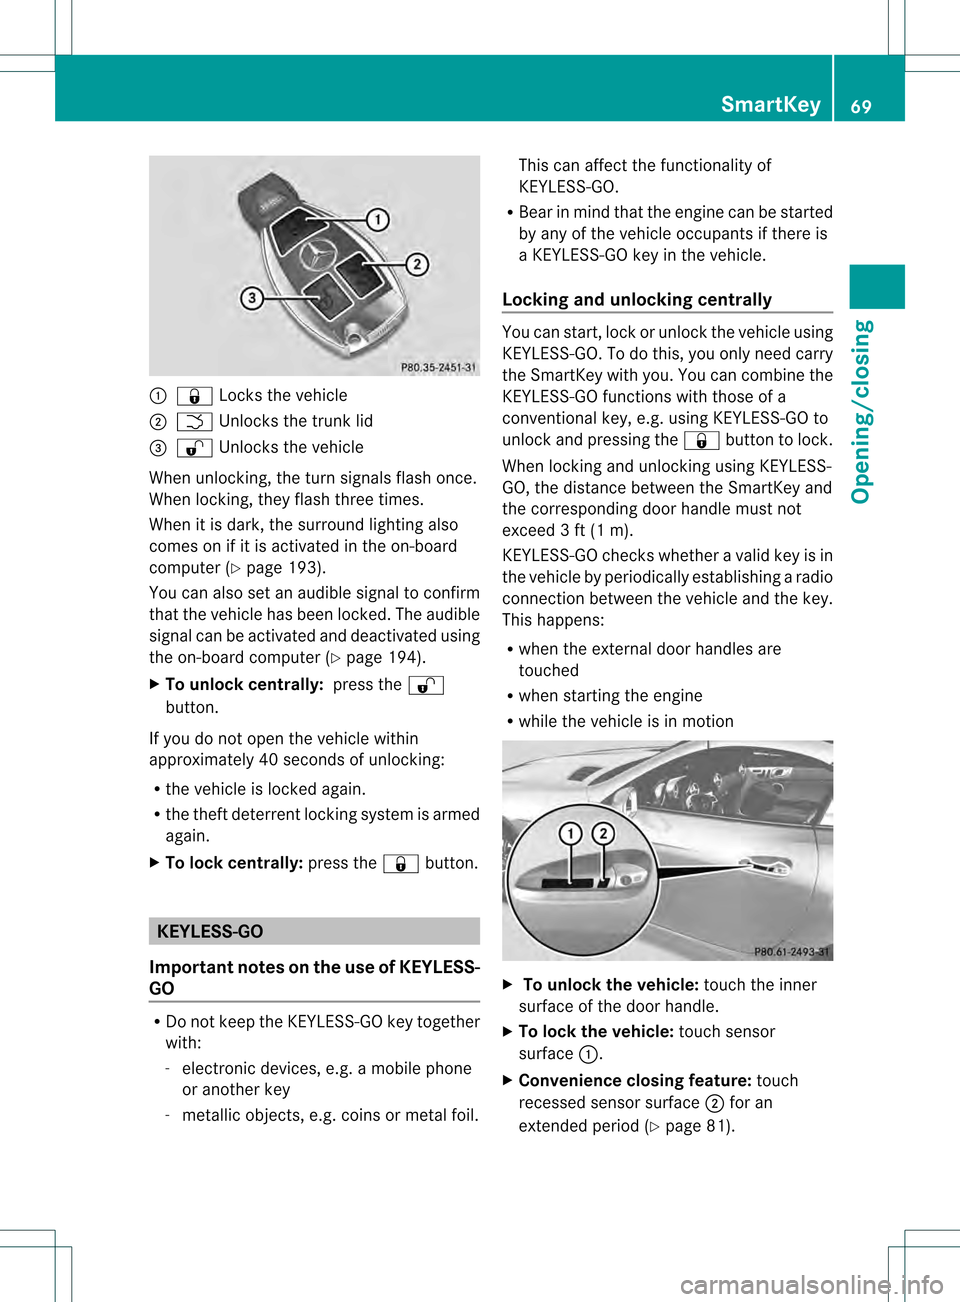 MERCEDES-BENZ SLK250 2012 R172 Owners Manual 0002
000F Locks the vehicle
0003 0006 Unlocks the trunk lid
0023 0010 Unlocks the vehicle
When unlocking, the turn signals flash once.
When locking, they flash three times.
When it is dark, the surrou